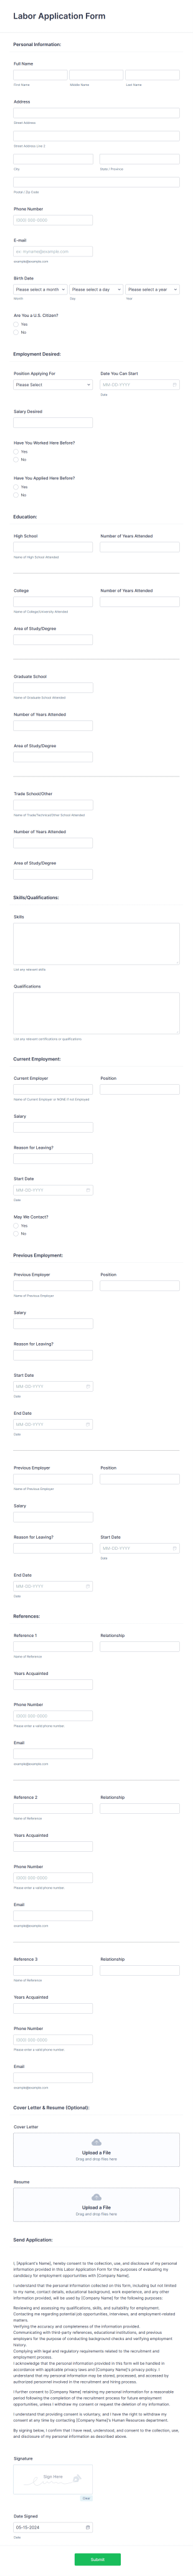 Labor Application Form Template